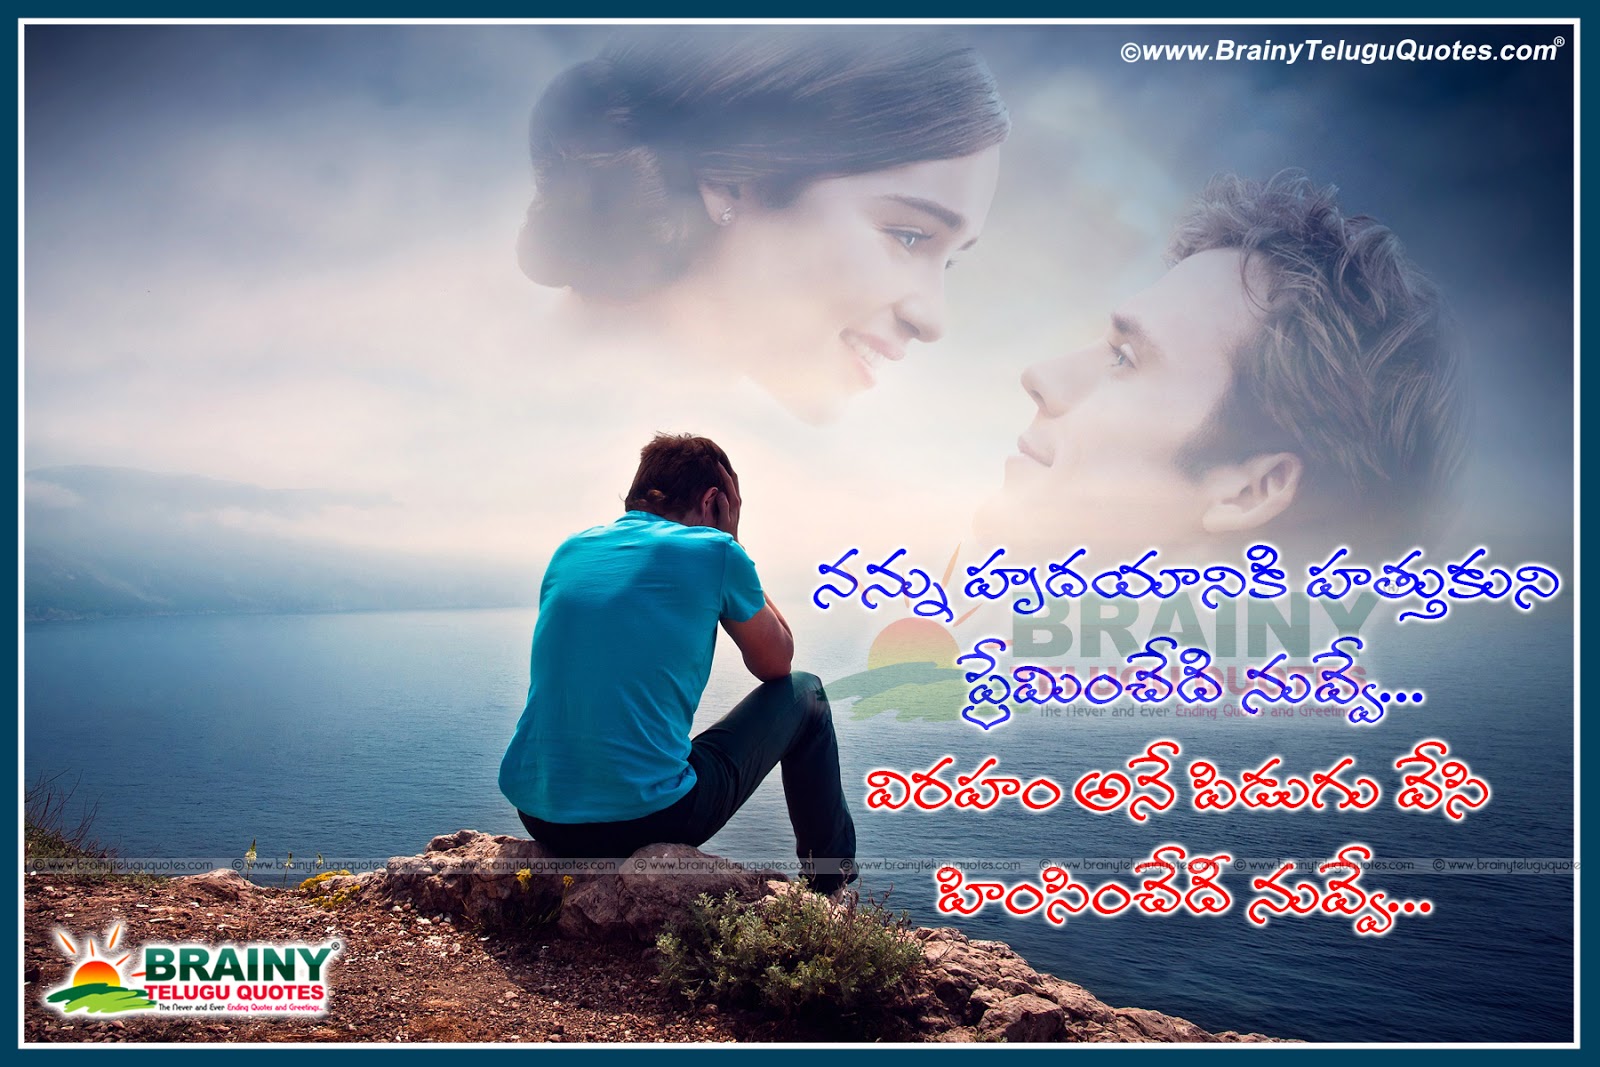 I Miss You Quotes in Telugu Heart Touching Messages wallpapers